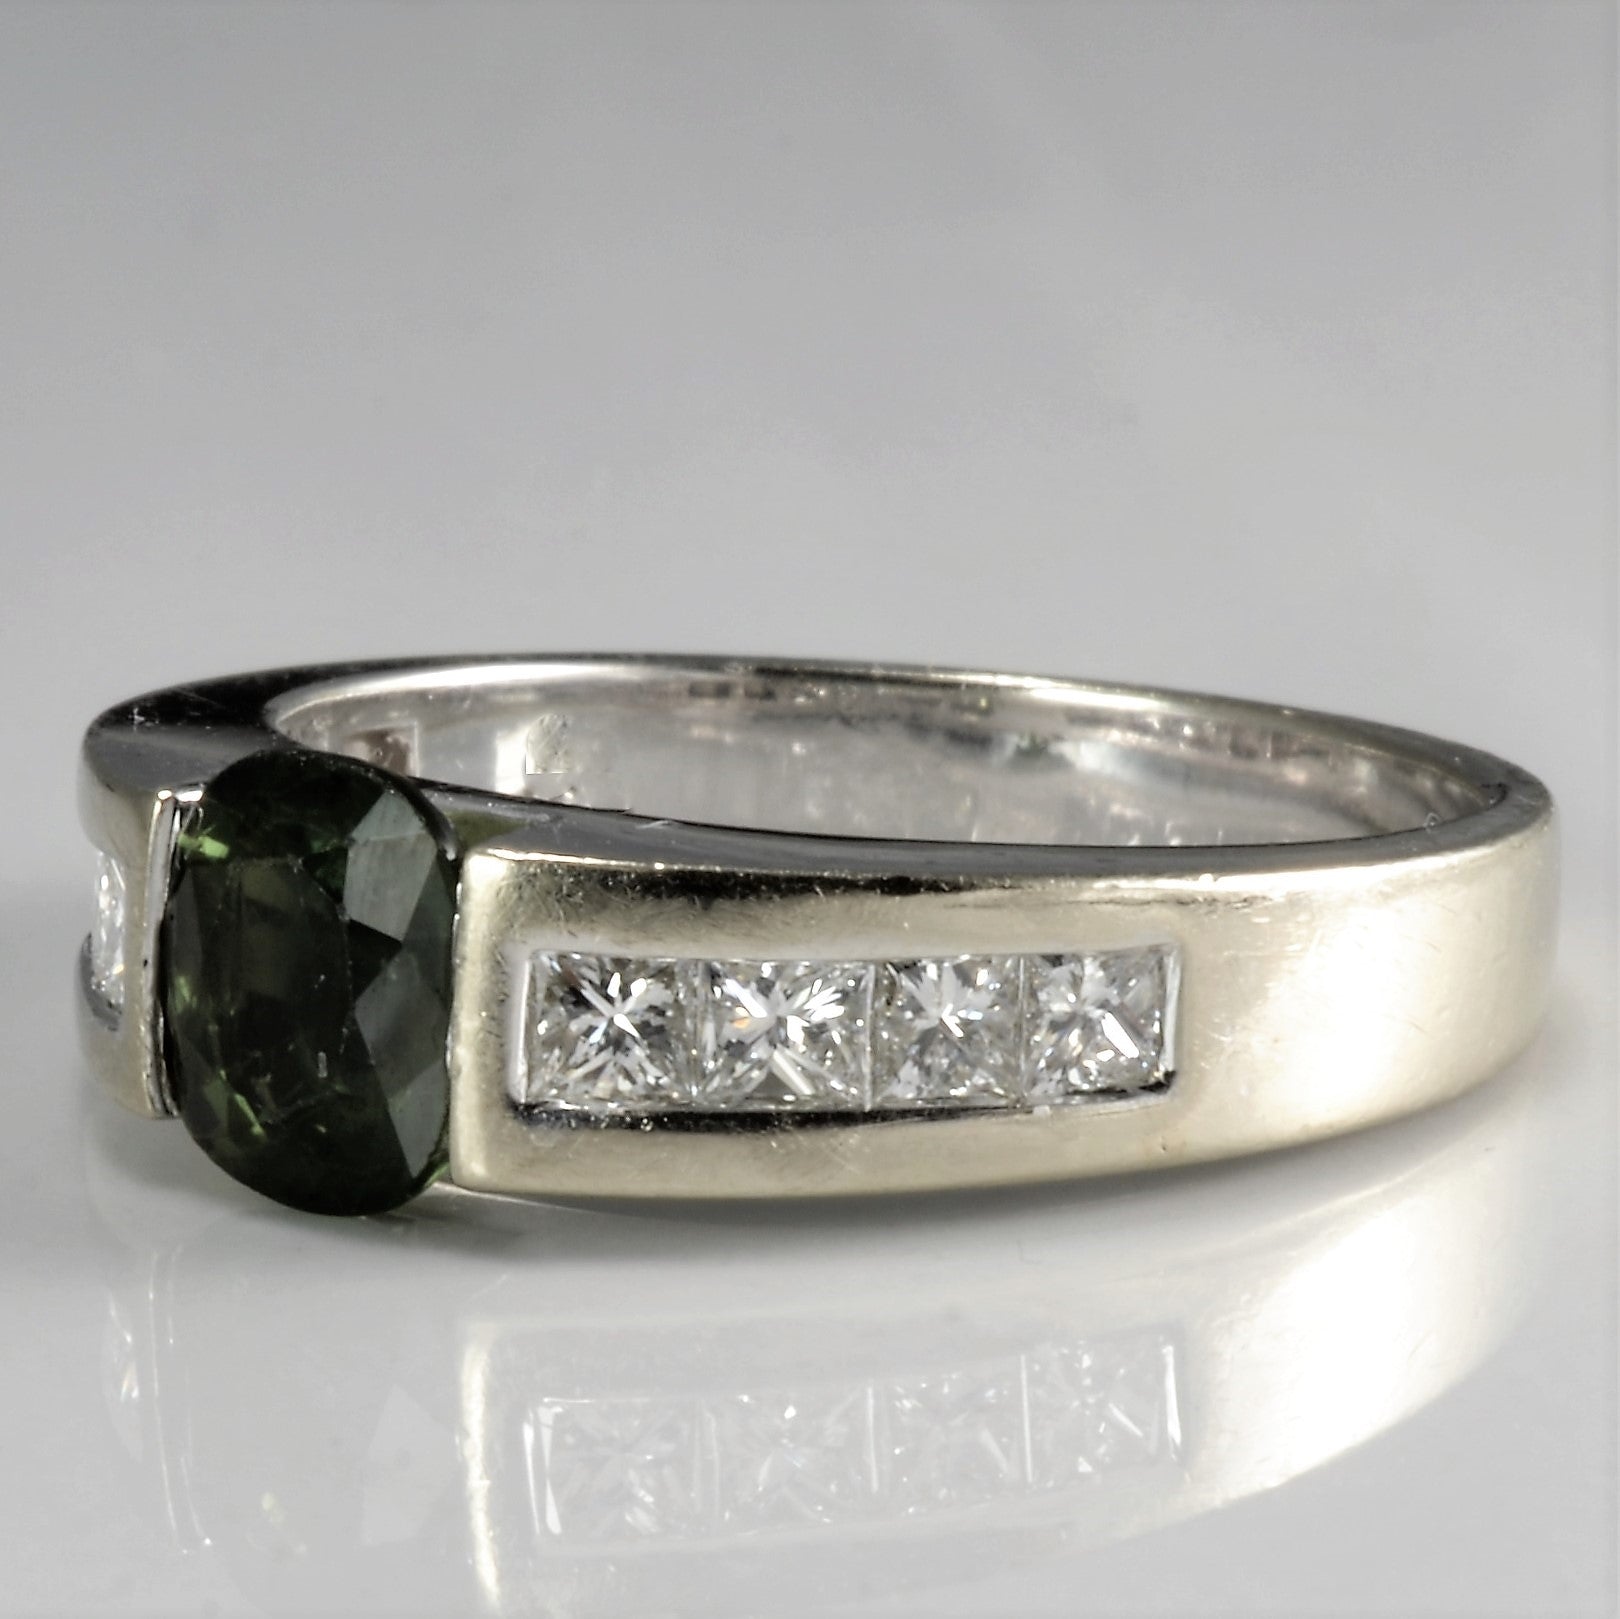 Tapered Green Sapphire & Channel Diamond Ring | 0.60 ctw, SZ 8.25 |